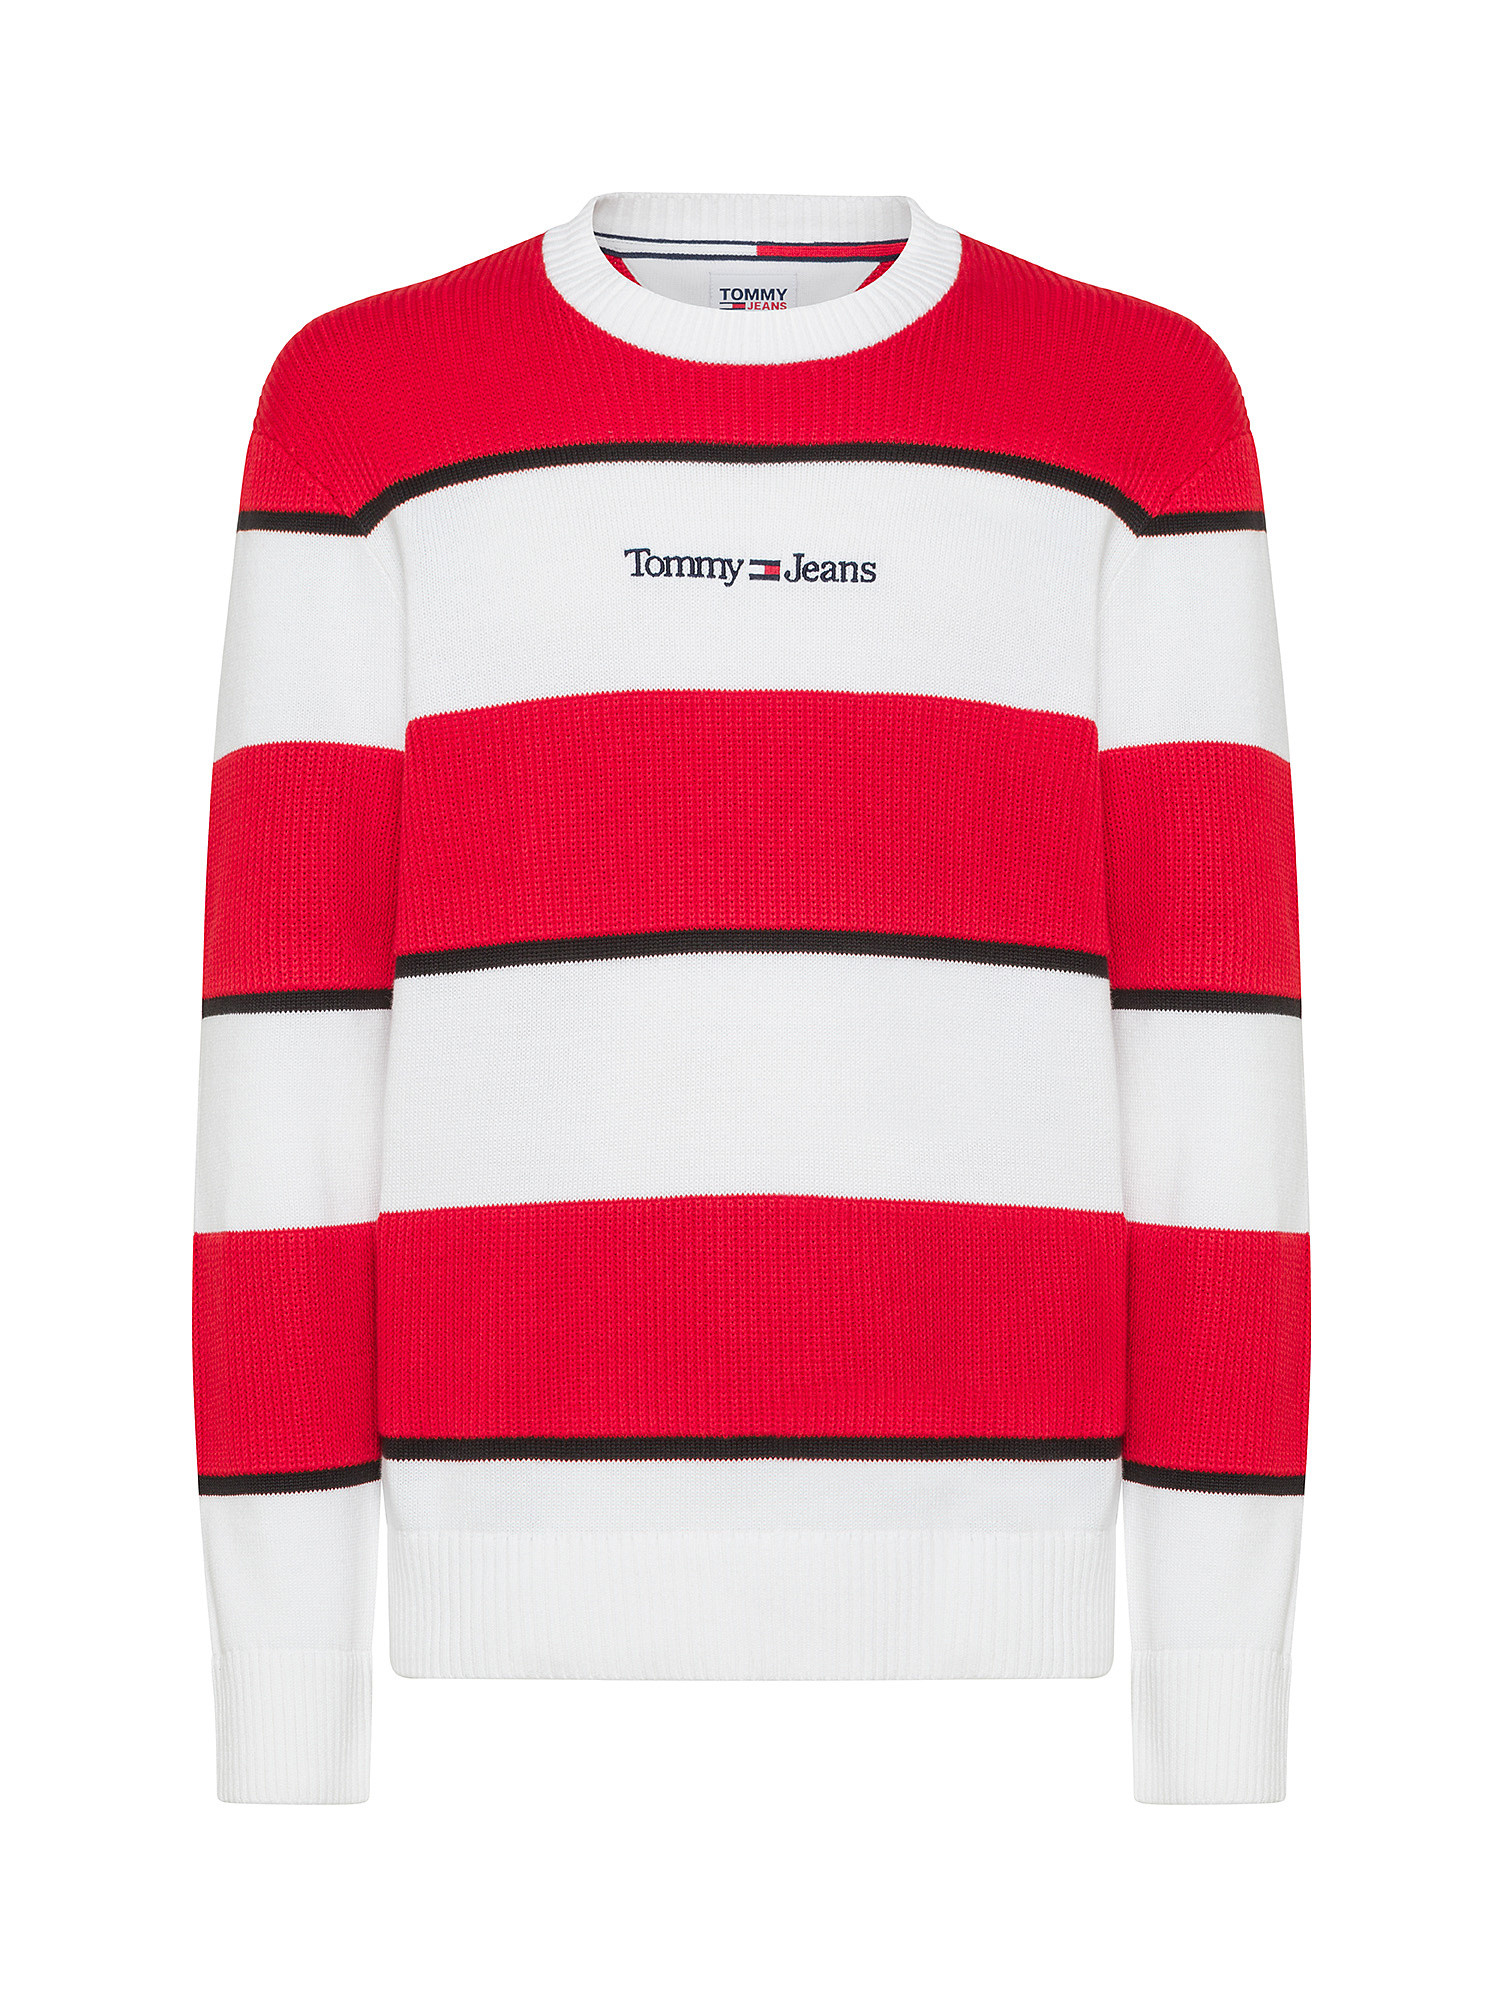 Tommy Jeans - Striped cotton sweater with logo, Red, large image number 0